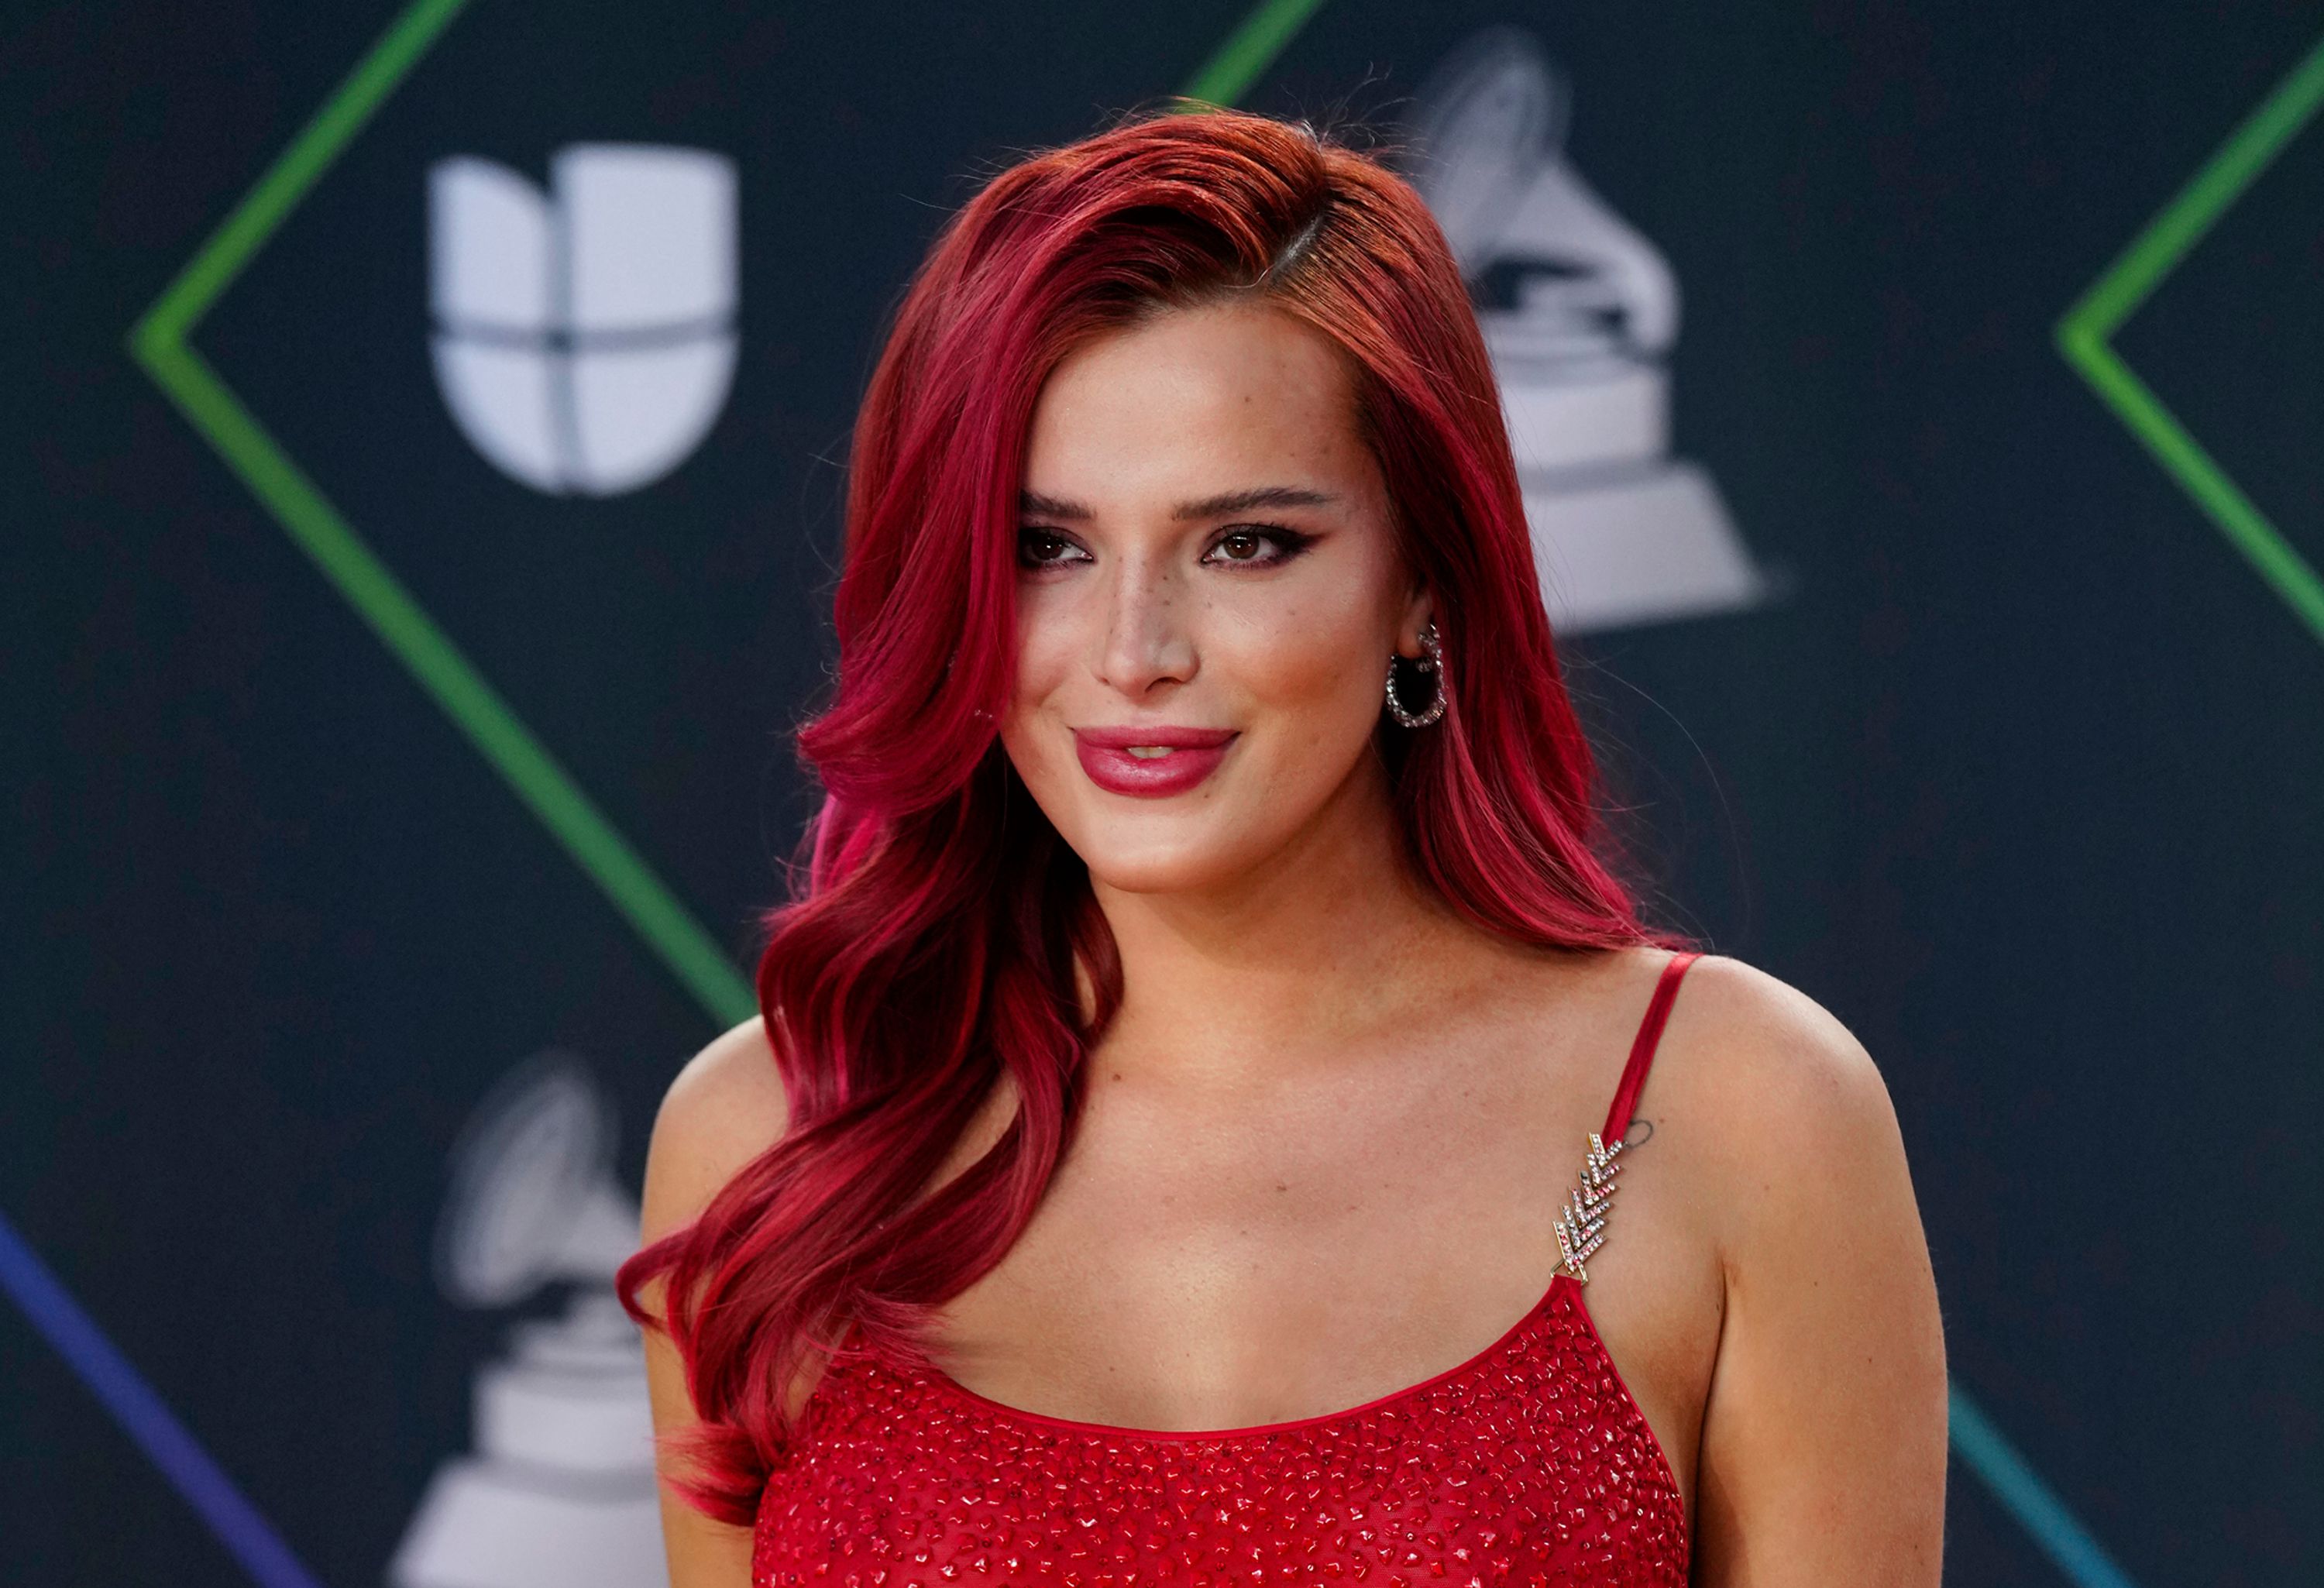 Bella Thorne's Relationship Drama: Guide to Everyone She's Dated